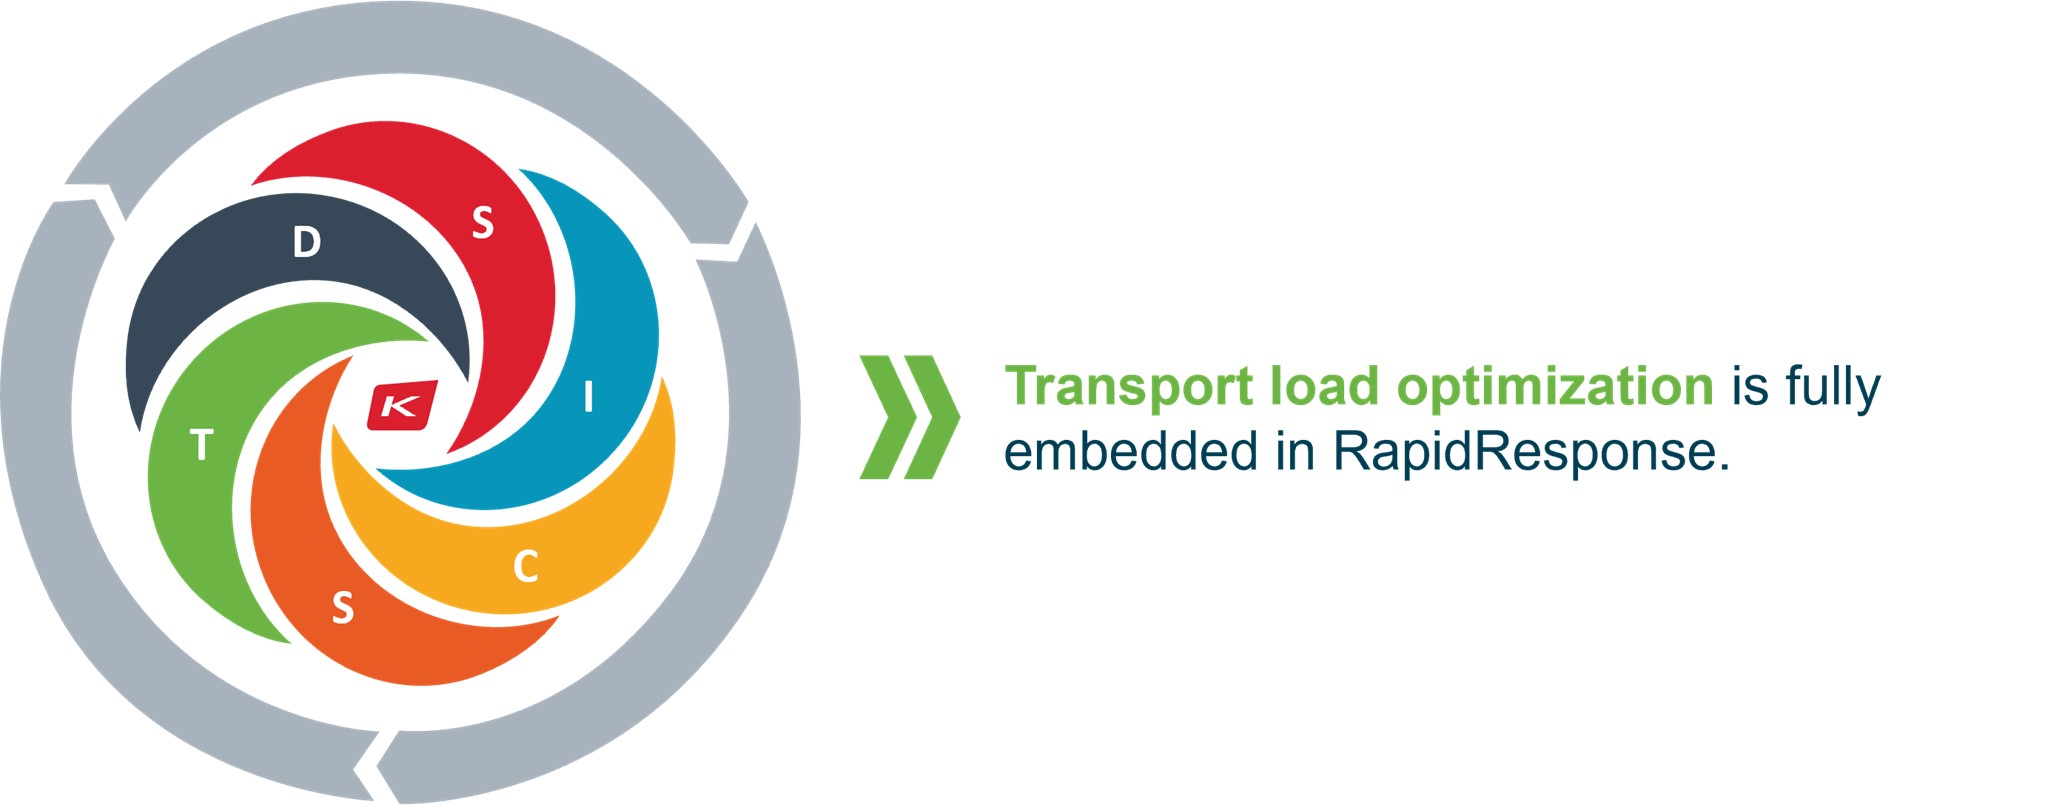 Graphic with text: "Transportation load optimization is fully embedded in RapidResponse."